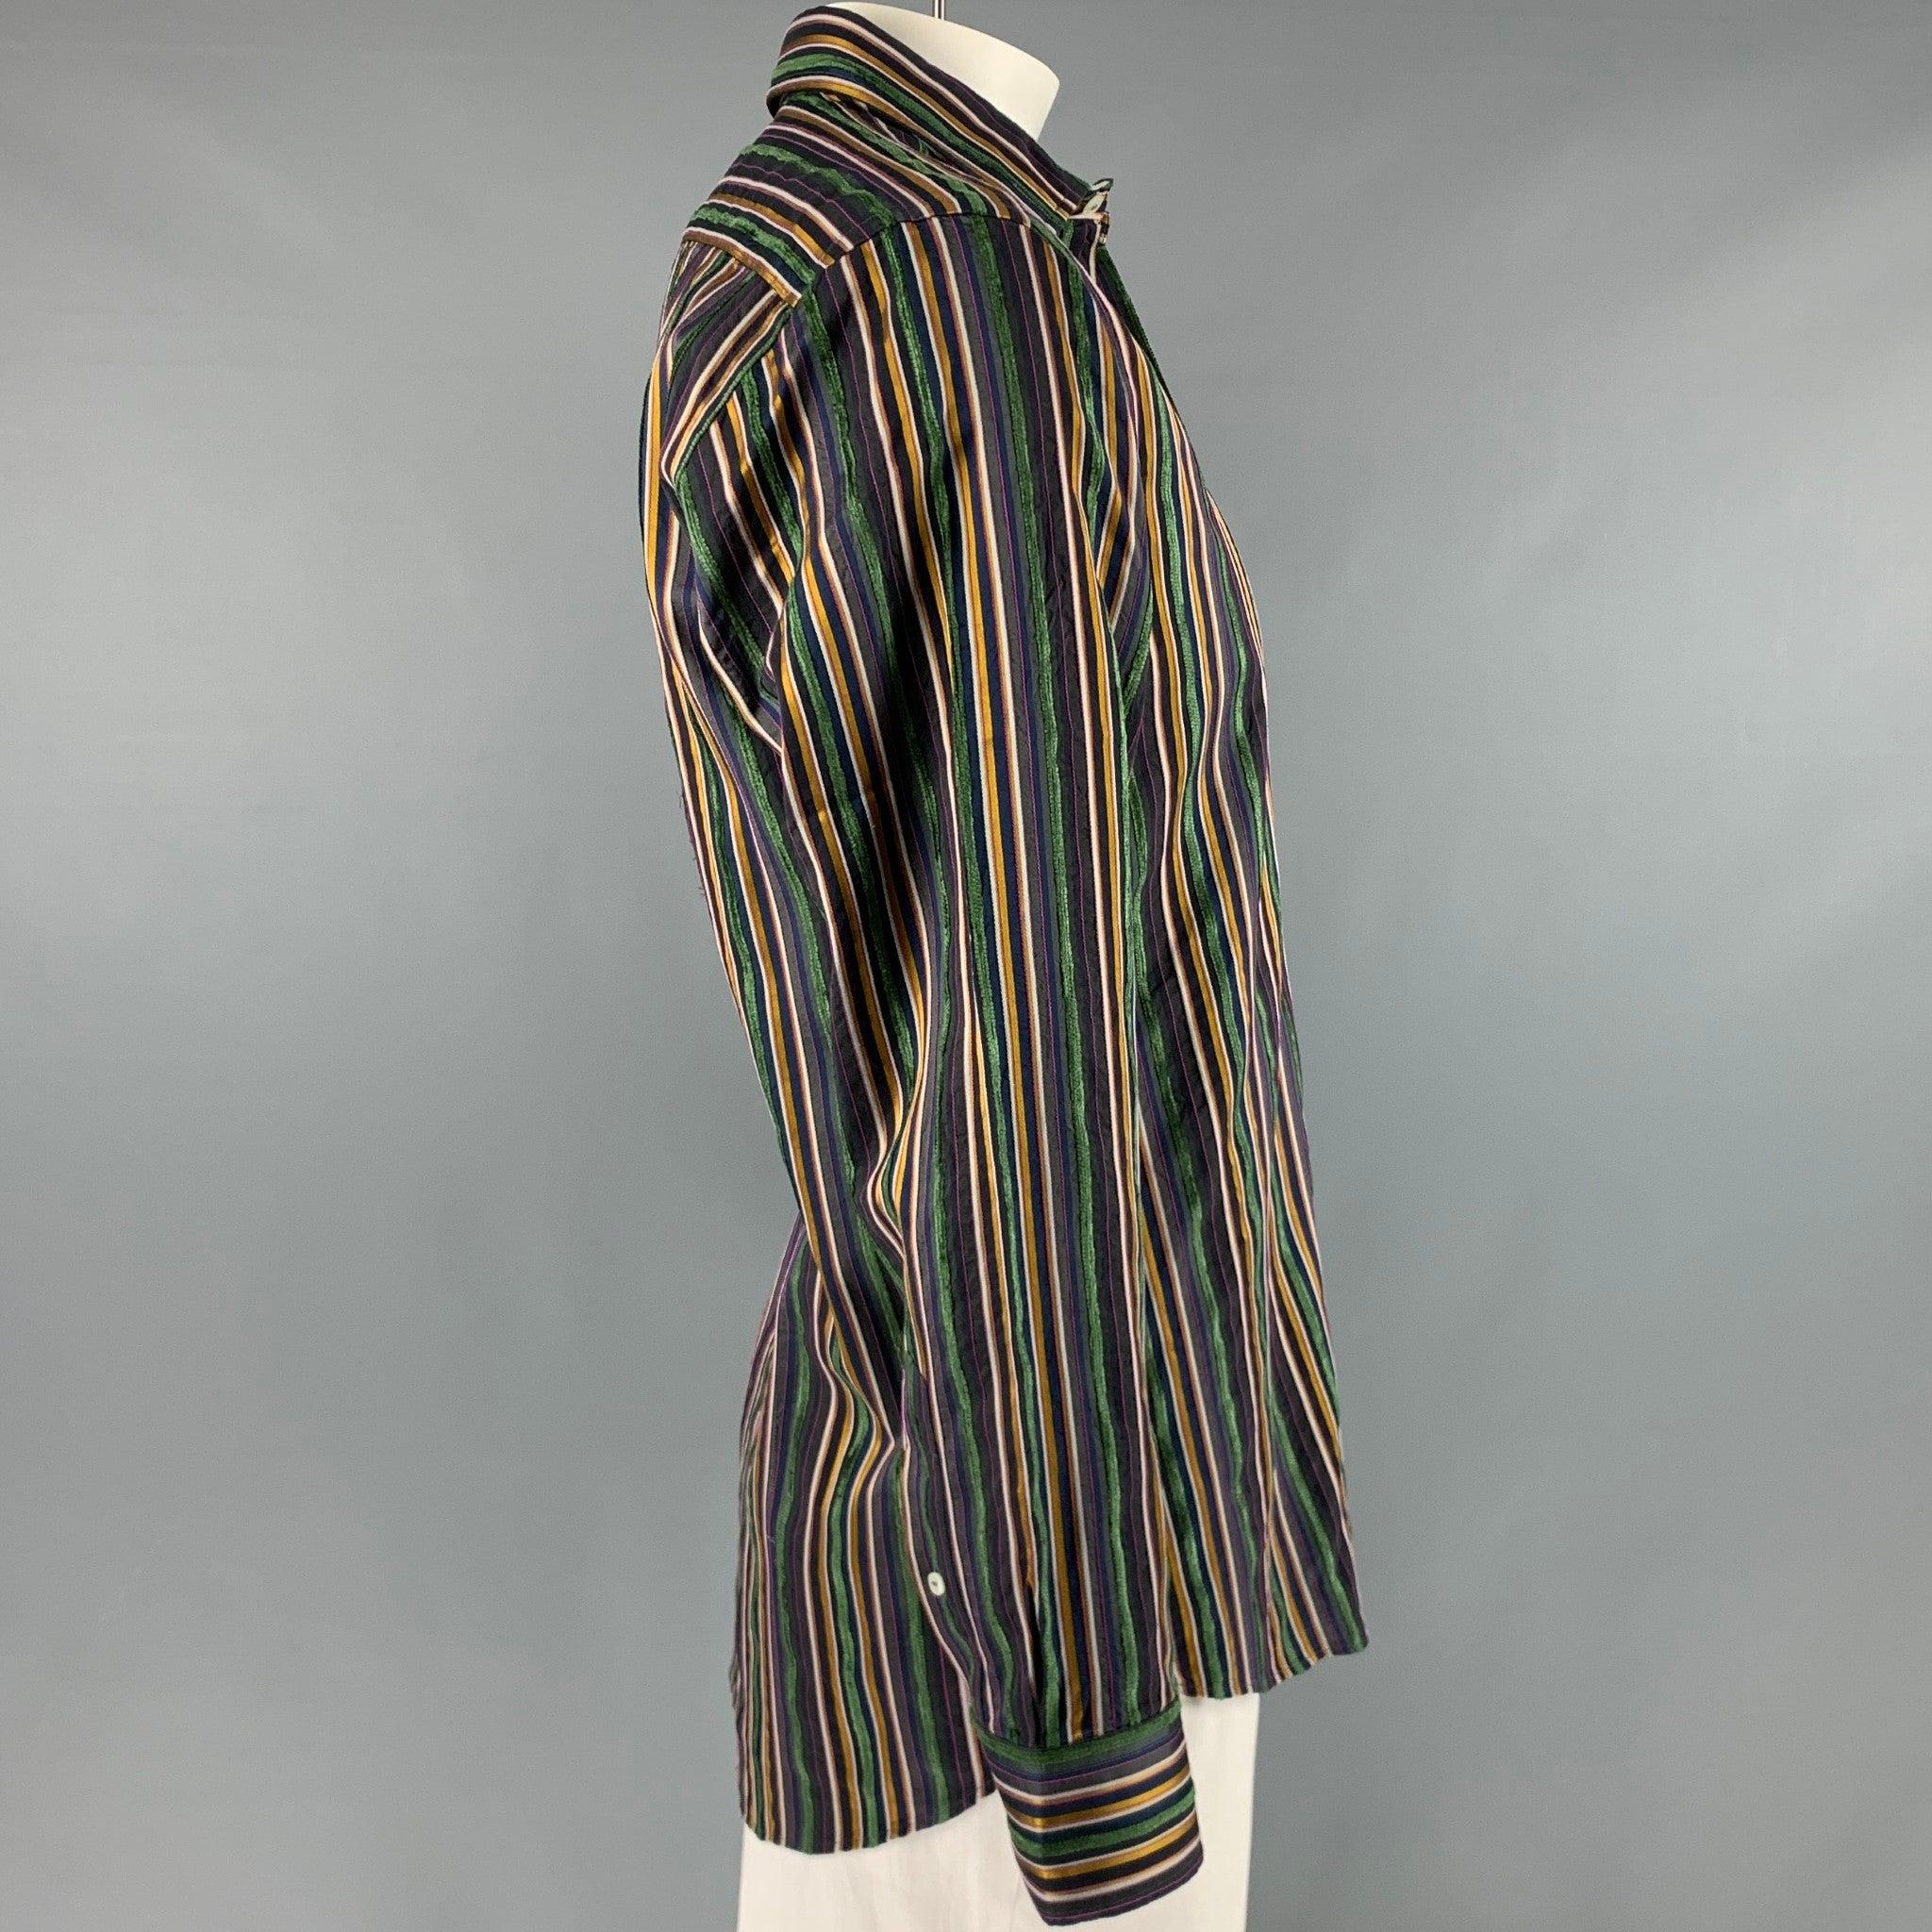 ETRO long sleeve shirt
in a
multi-color cotton blend fabric featuring vertical stripe pattern, textured style, and a button closure. Made in Italy.Very Good Pre-Owned Condition. Minor signs of wear. 

Marked:   42 

Measurements: 
 
Shoulder: 17.5